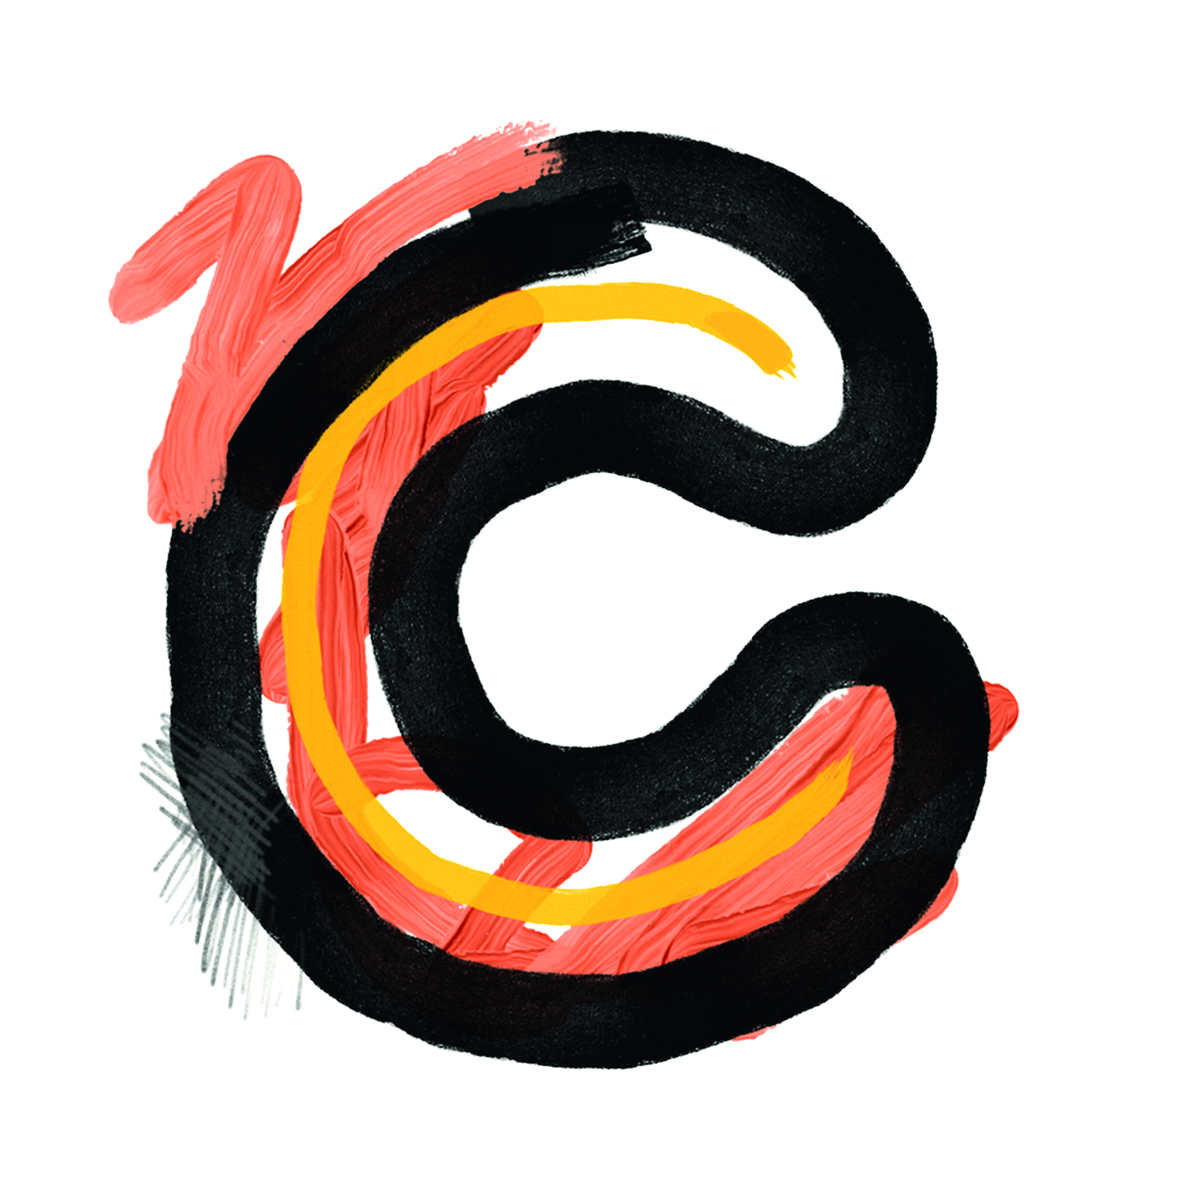 abstract-letter-C-2017.jpg